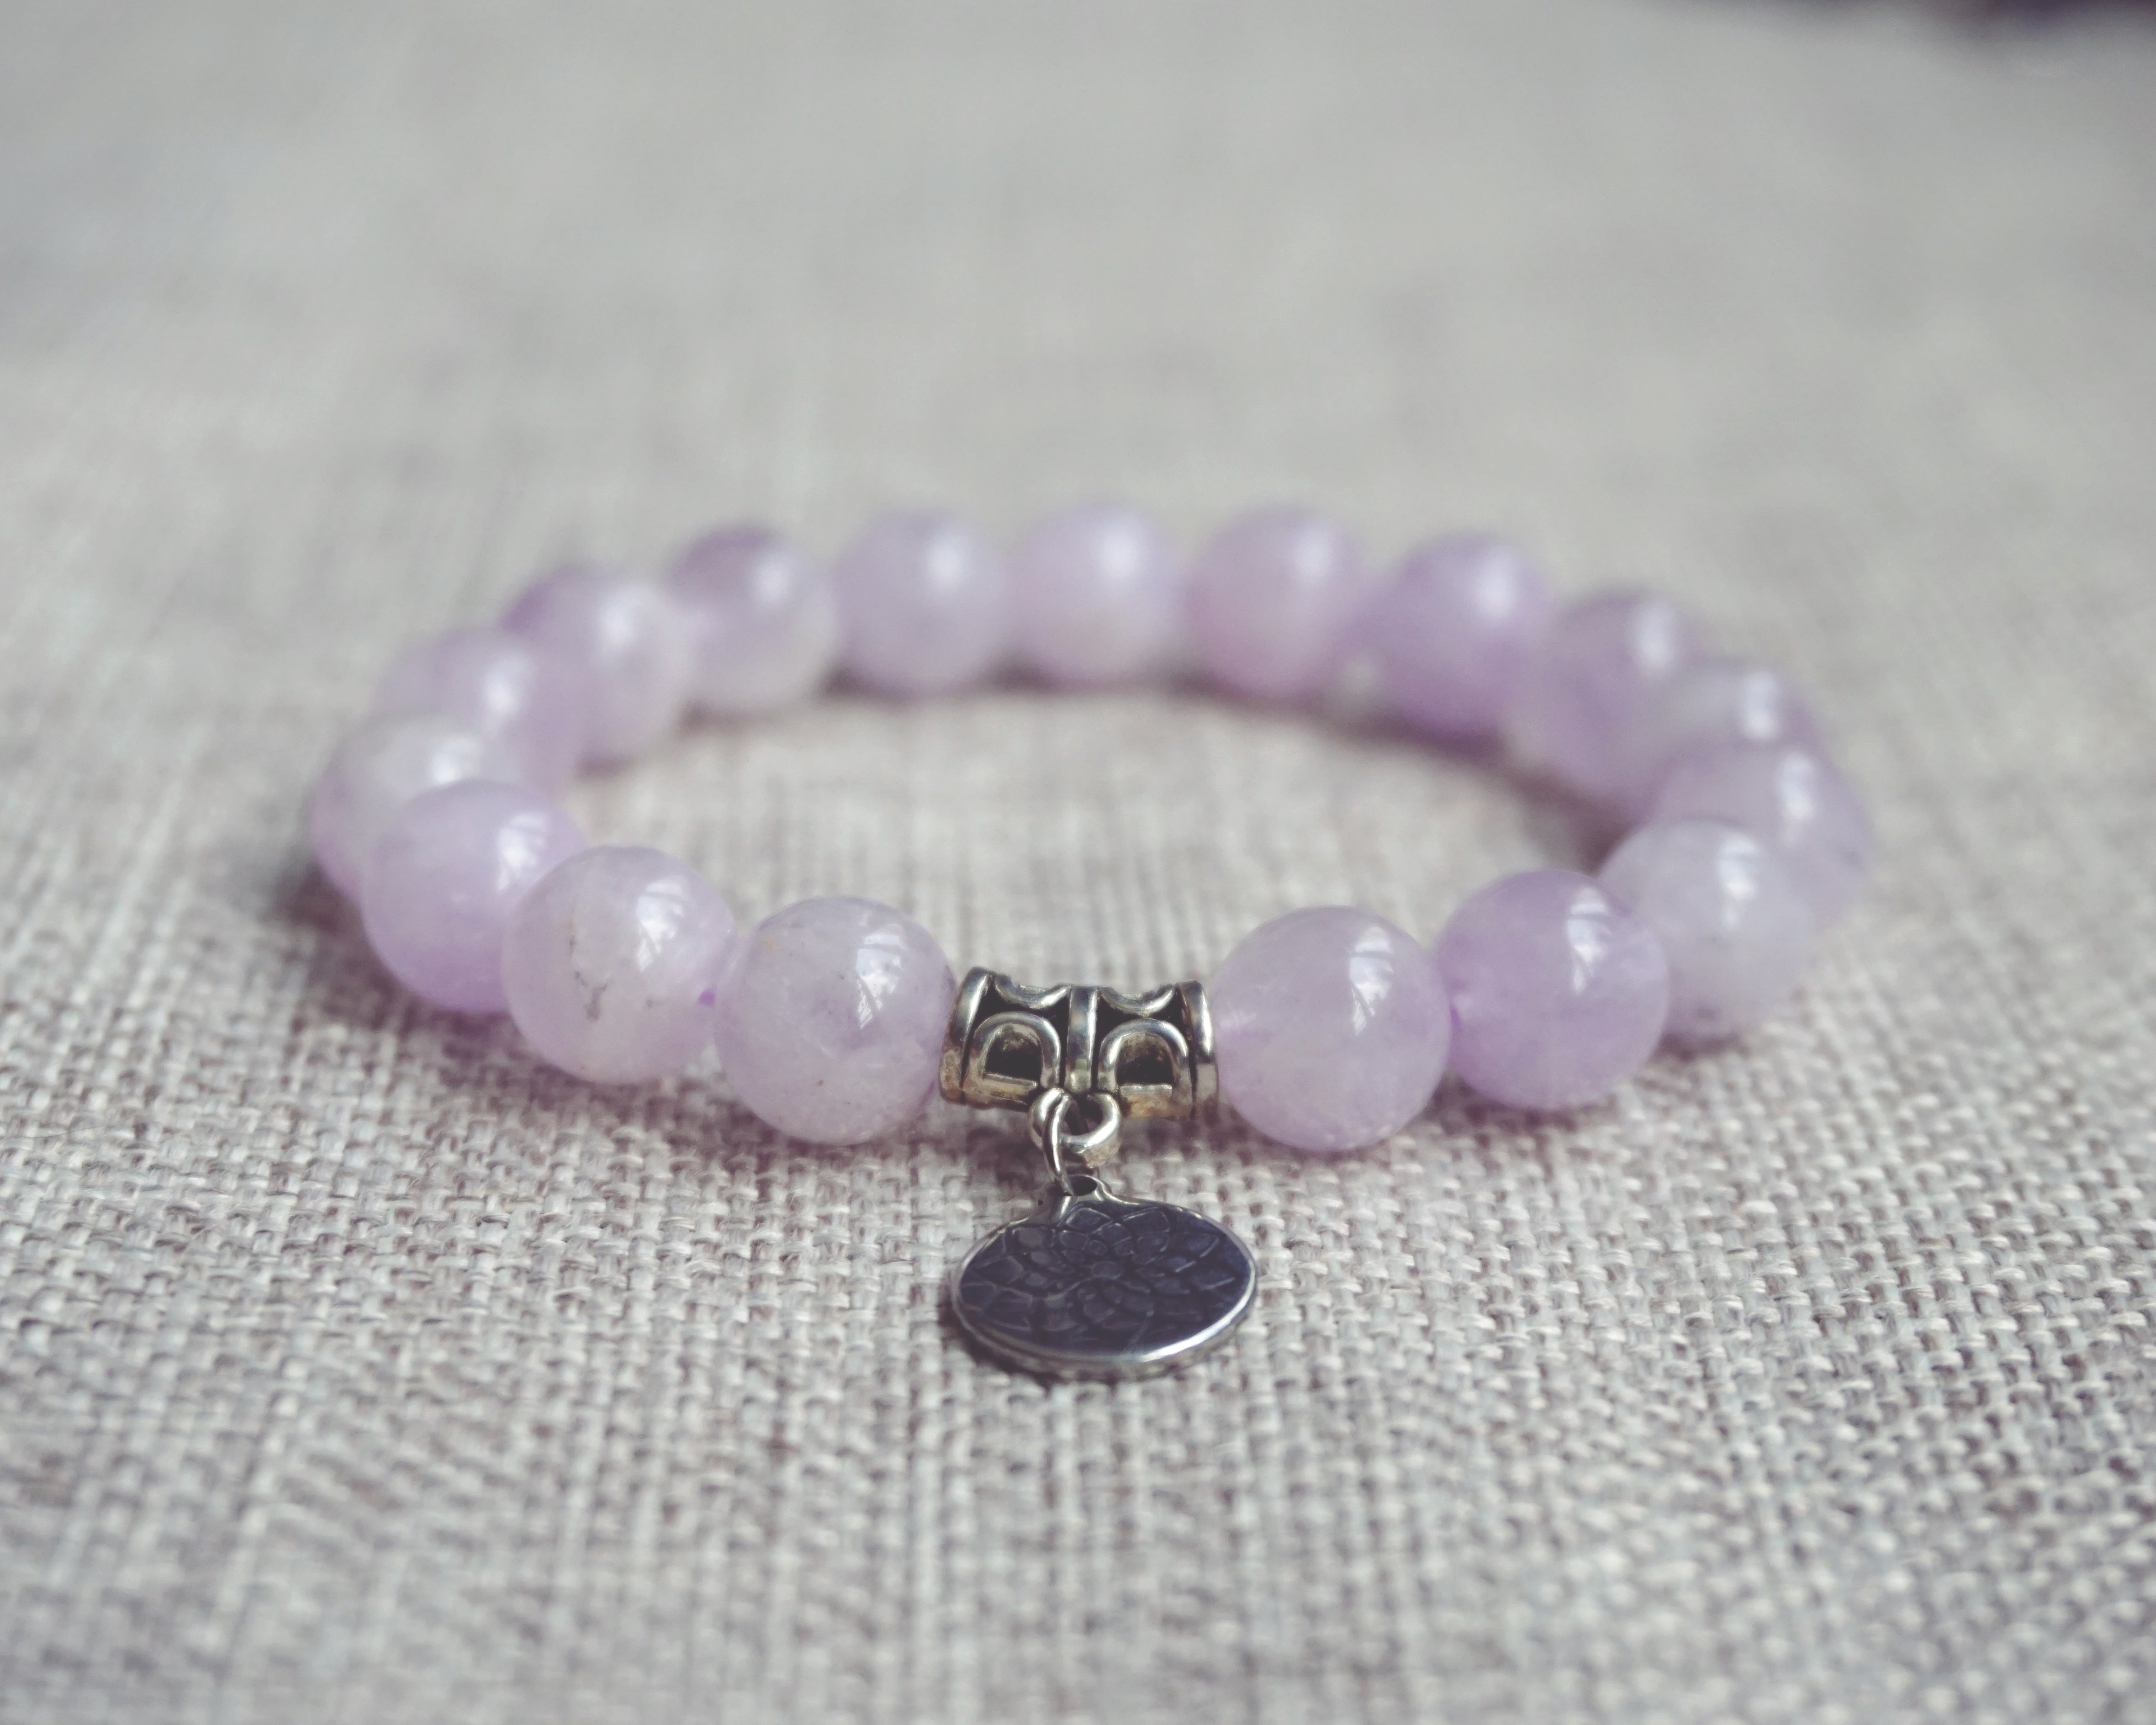 Benefits Of Wearing Crystal Bracelets Made From Amethyst - Healing Crystals  And Calm Bracelet - YouTube